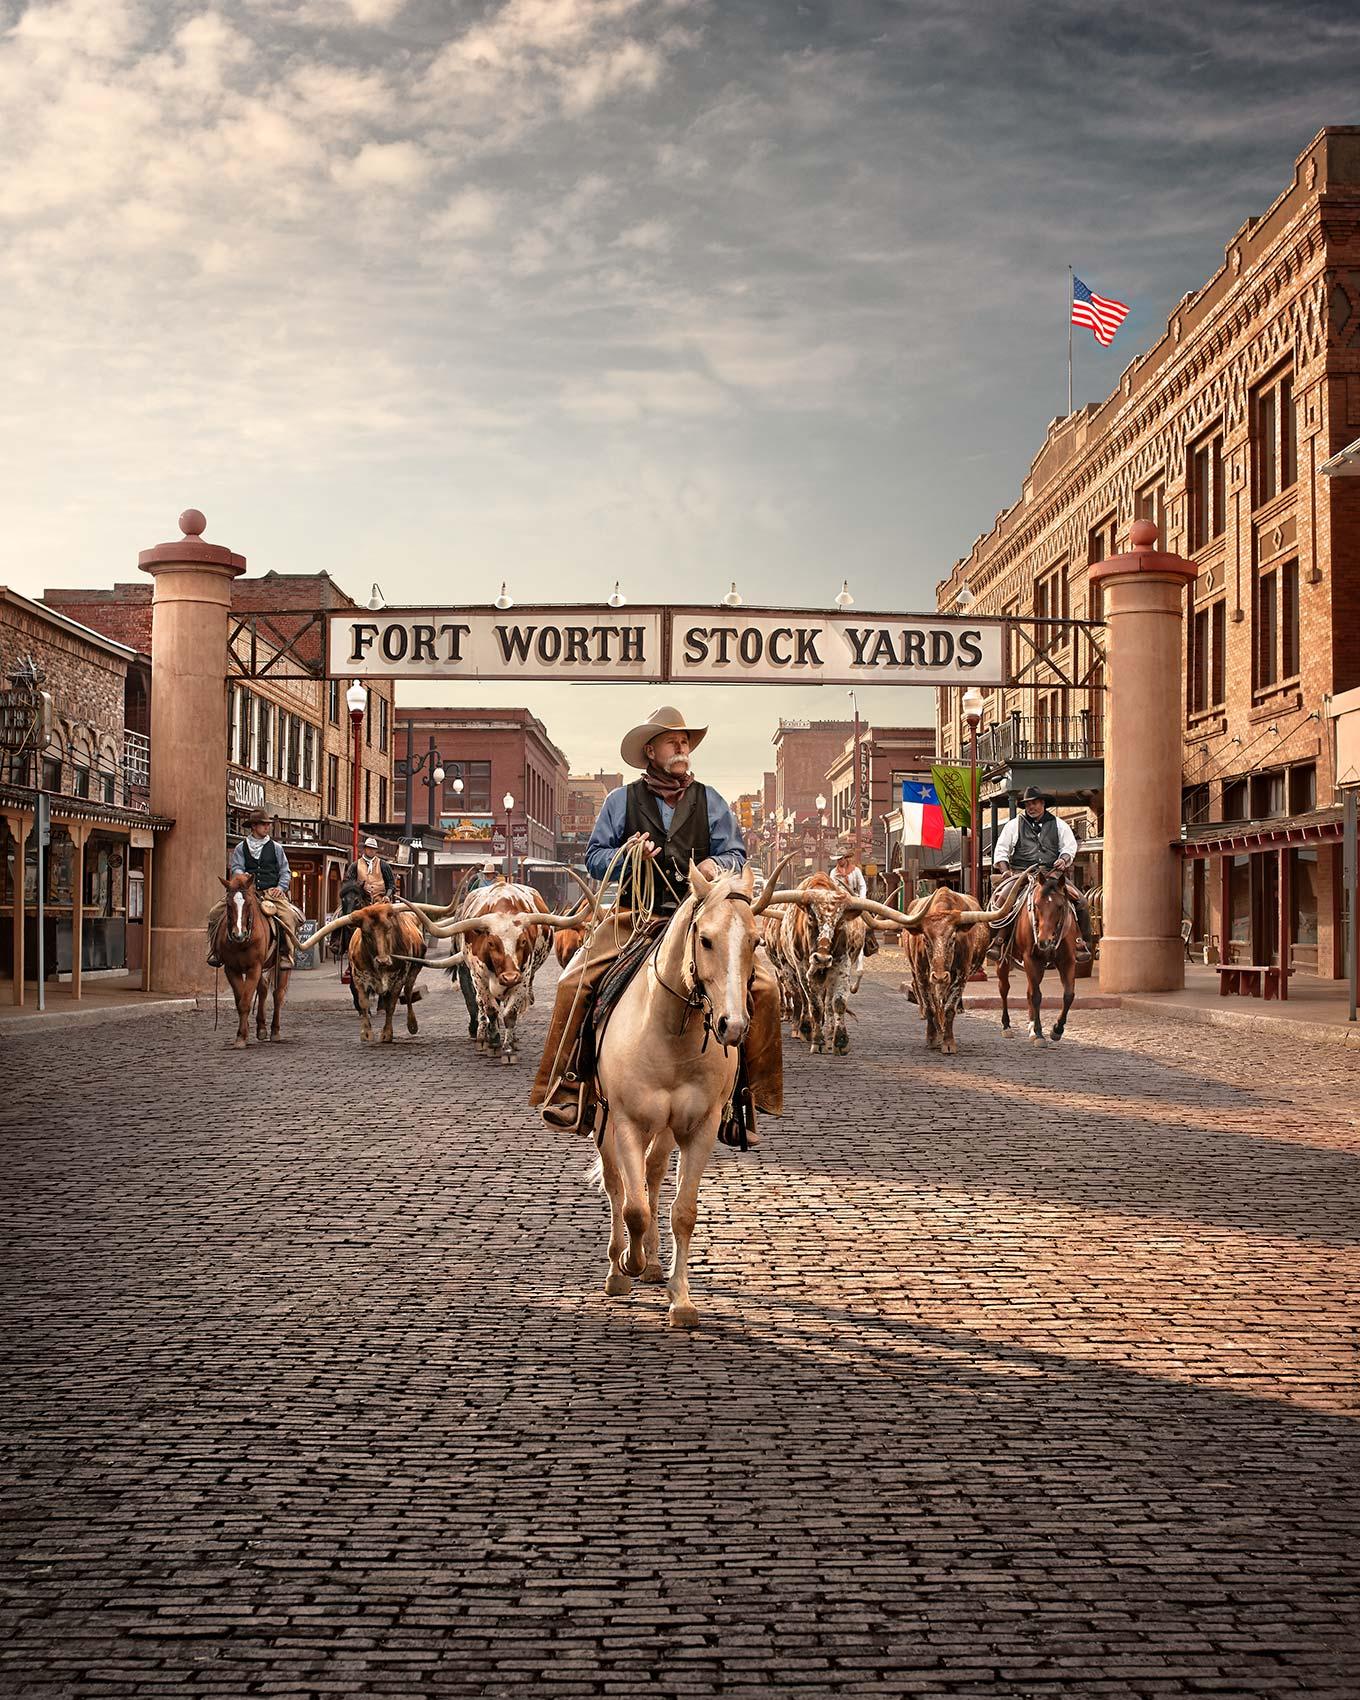 Randal Ford - The Great Homecoming at the Fort Worth Stockyards